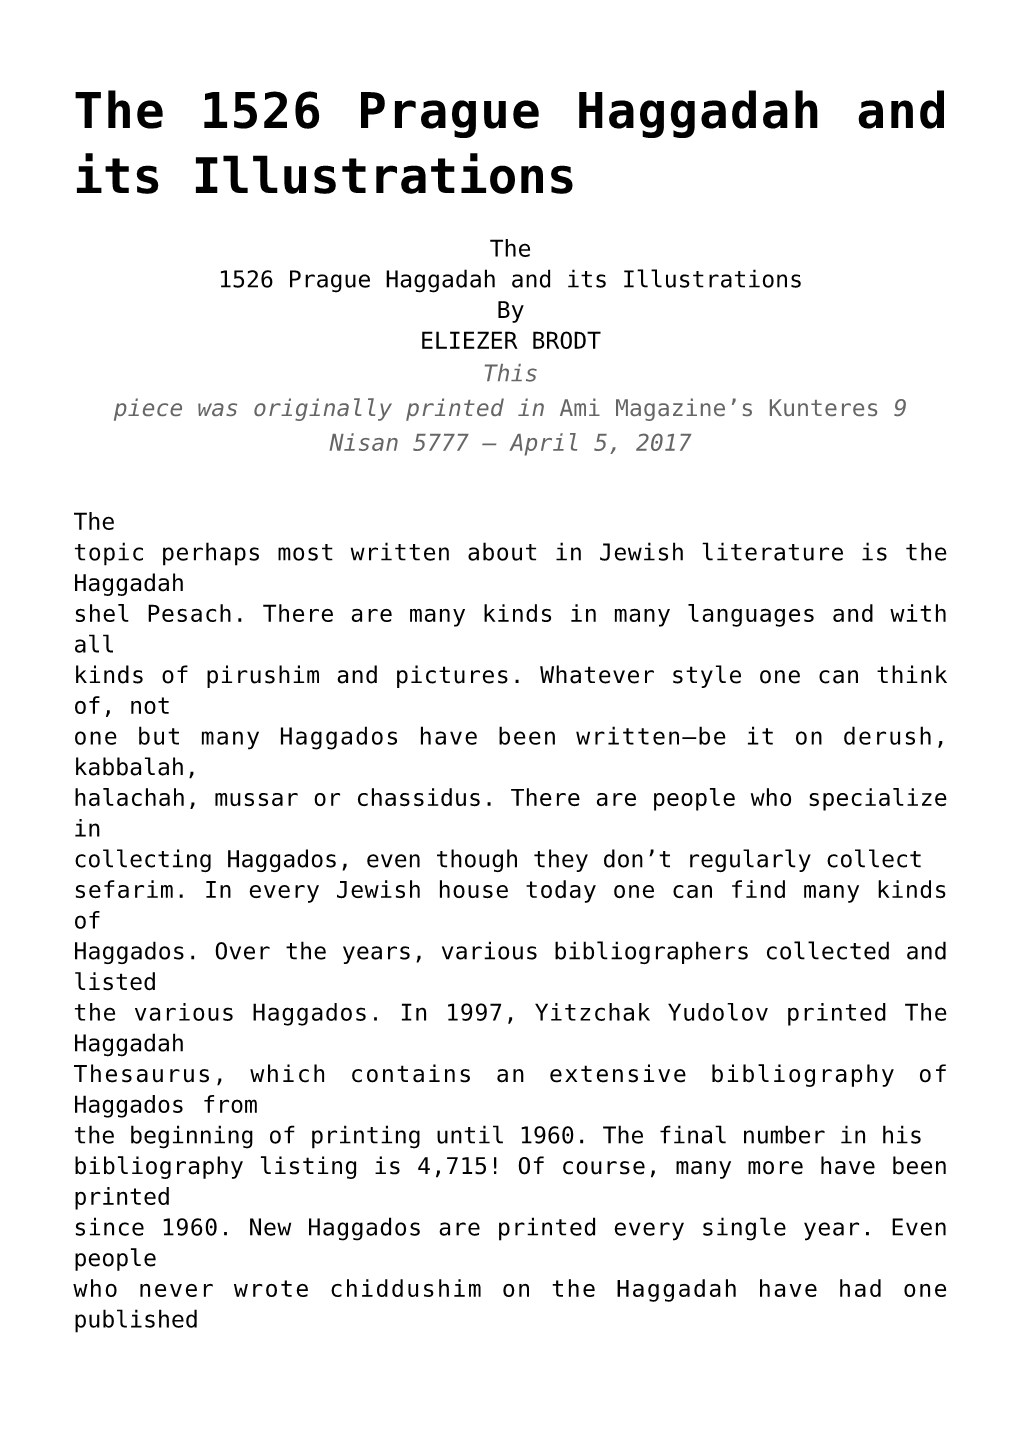 The 1526 Prague Haggadah and Its Illustrations,Passover with Apostates